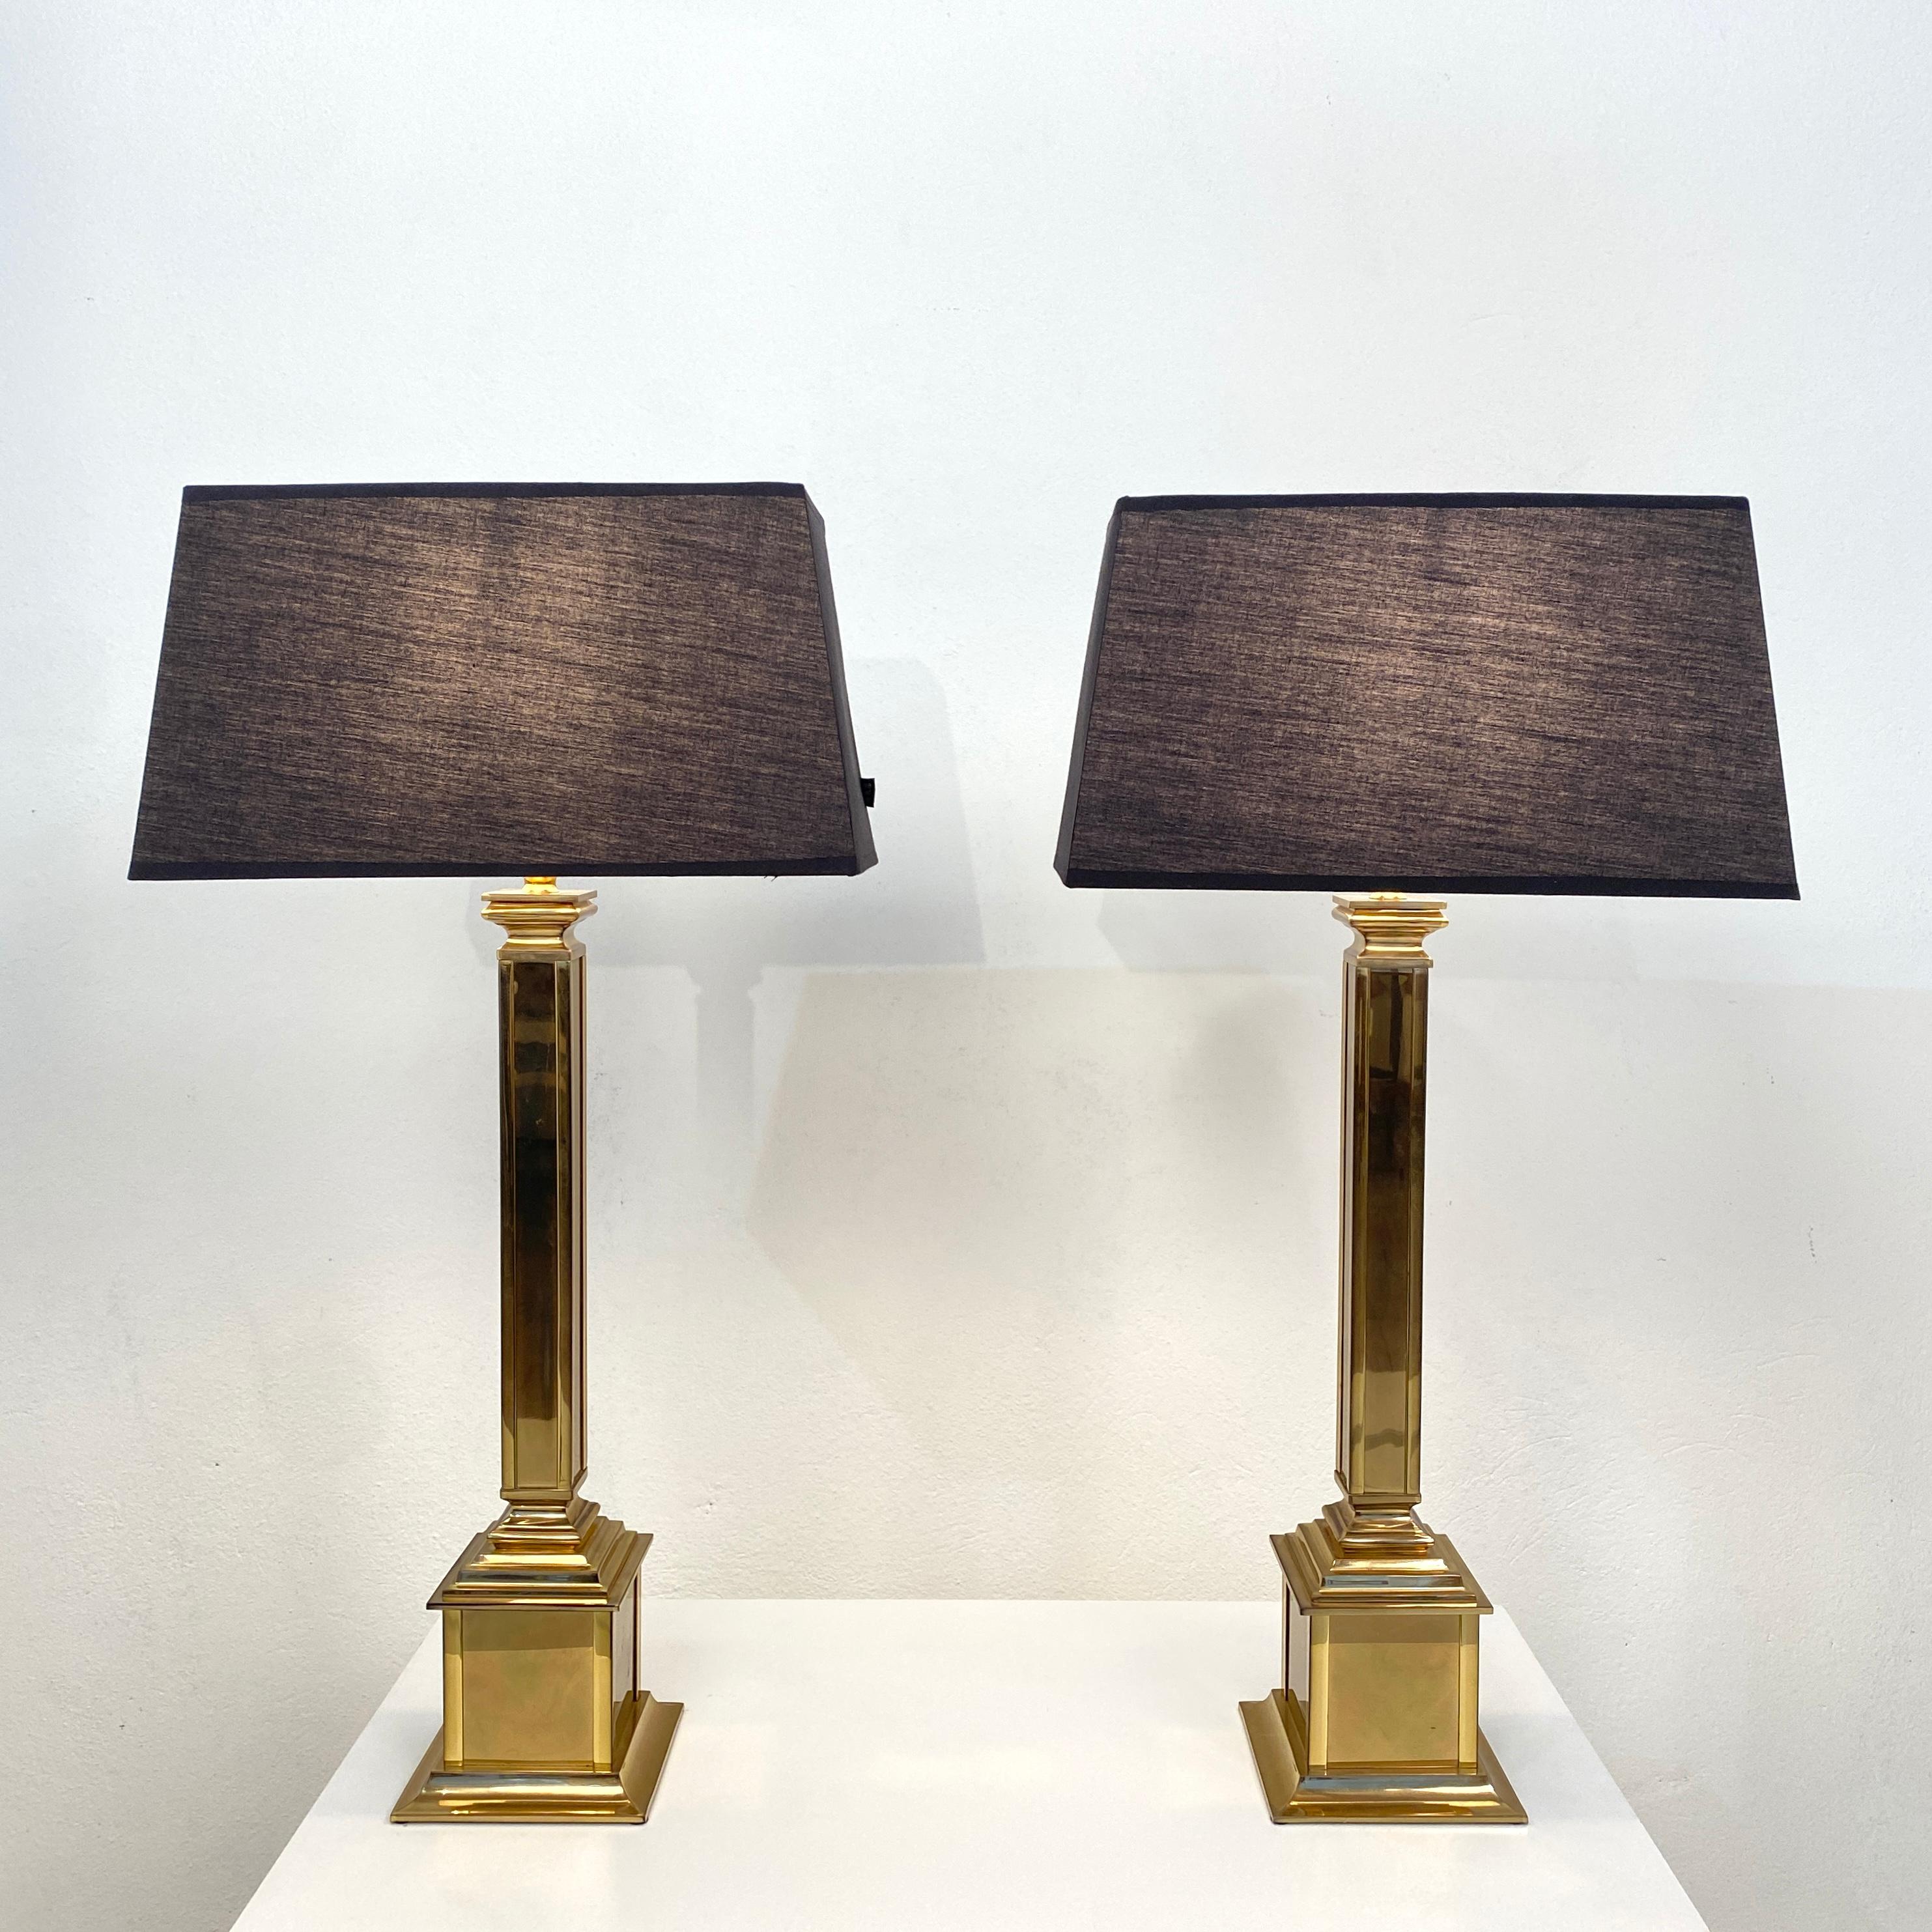 This pair of German midcentury gilded brass table lamps where made, circa 1970. Beautiful heavy model. Thy come with black fabric lamp shades.
A unique piece which is a great eyecatcher for your antique, modern, Space Age or midcentury